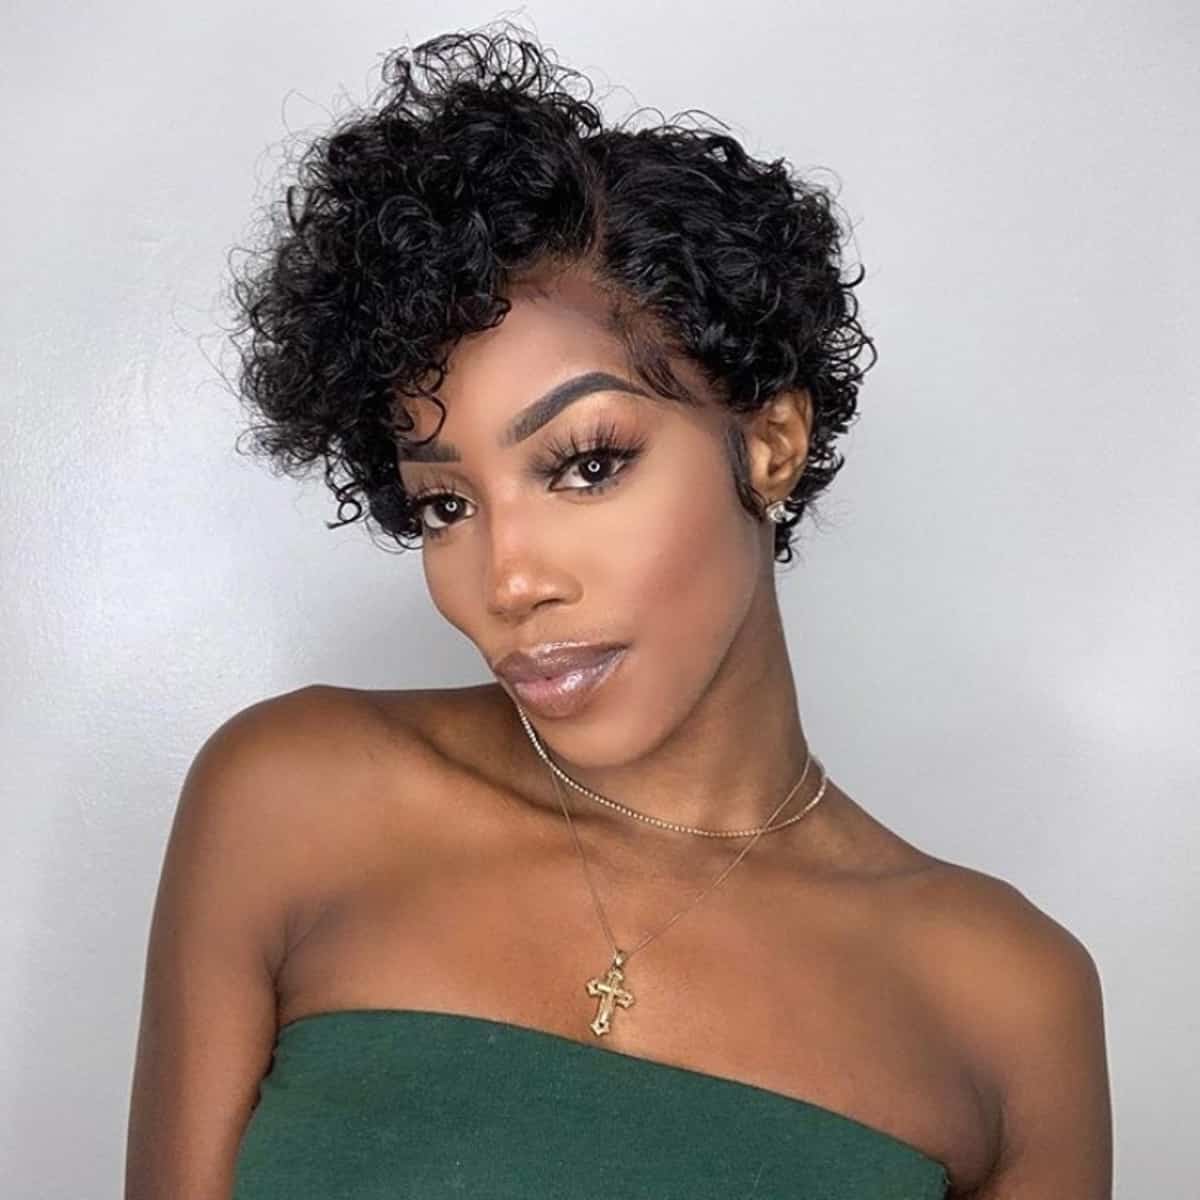 Pixie Haircut for Black Women with Curly Hair